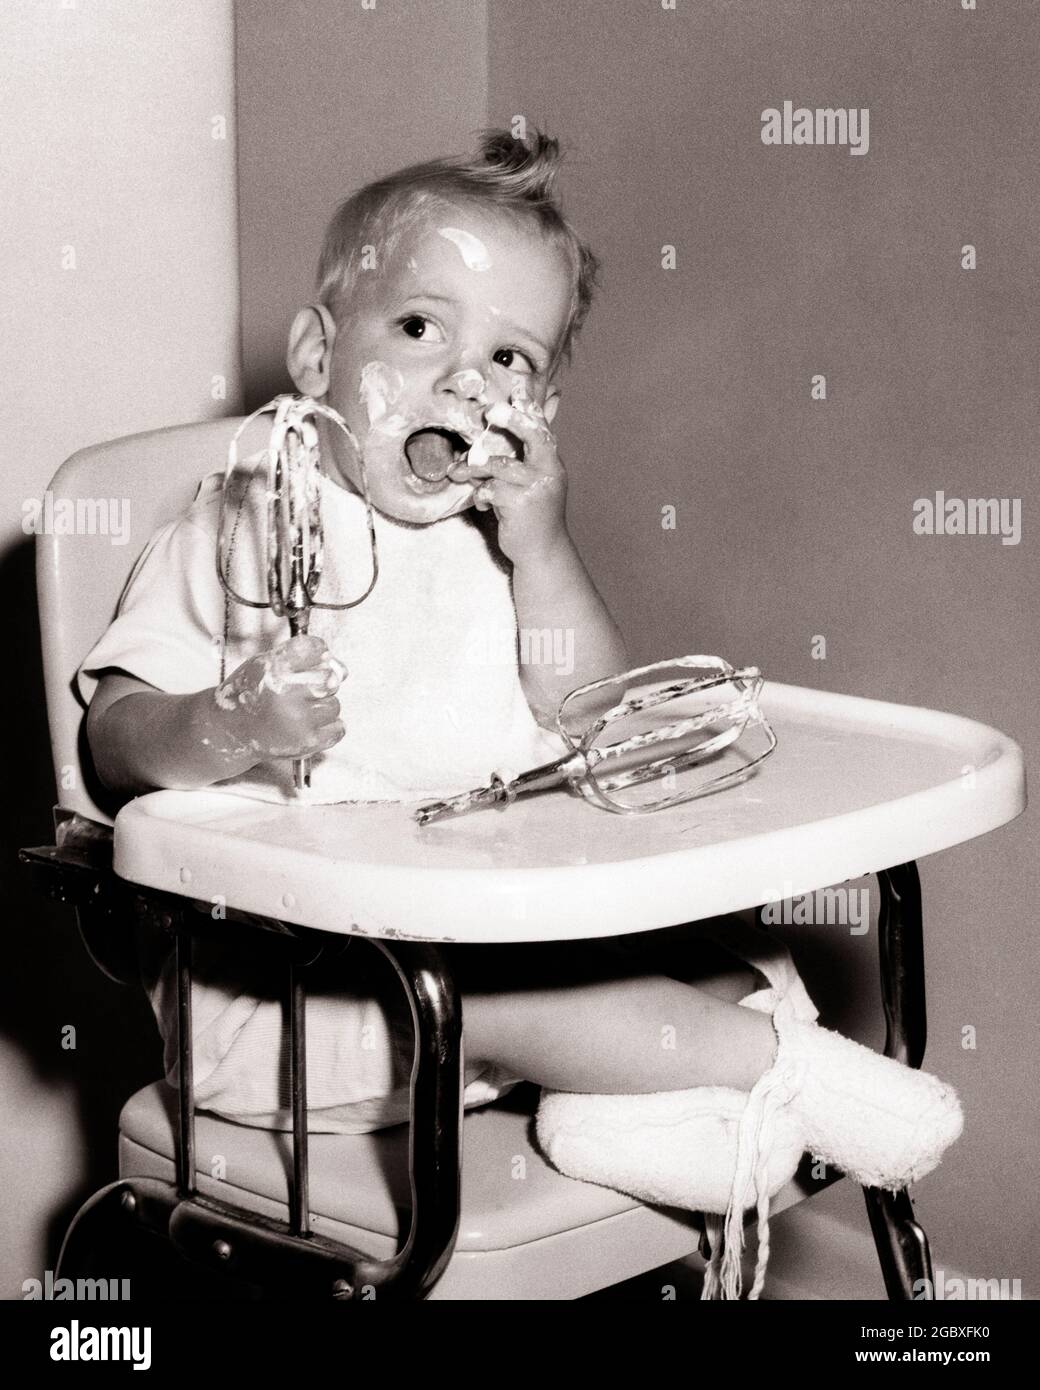 1950s BABY BOY WITH MESSY HANDS AND FACE SITTING IN HIGH CHAIR LICKING CAKE BATTER OFF OF ELECTRIC MIXER BEATERS  - b785 JHN001 HARS MALES ICING B&W BATTER GOALS HUMOROUS LICKING HIGHCHAIR MESSY COMICAL OPPORTUNITY CONCEPTUAL COMEDY BABY BOY BEATERS STICKY HIGH CHAIR JUVENILES BLACK AND WHITE CAUCASIAN ETHNICITY OLD FASHIONED Stock Photo